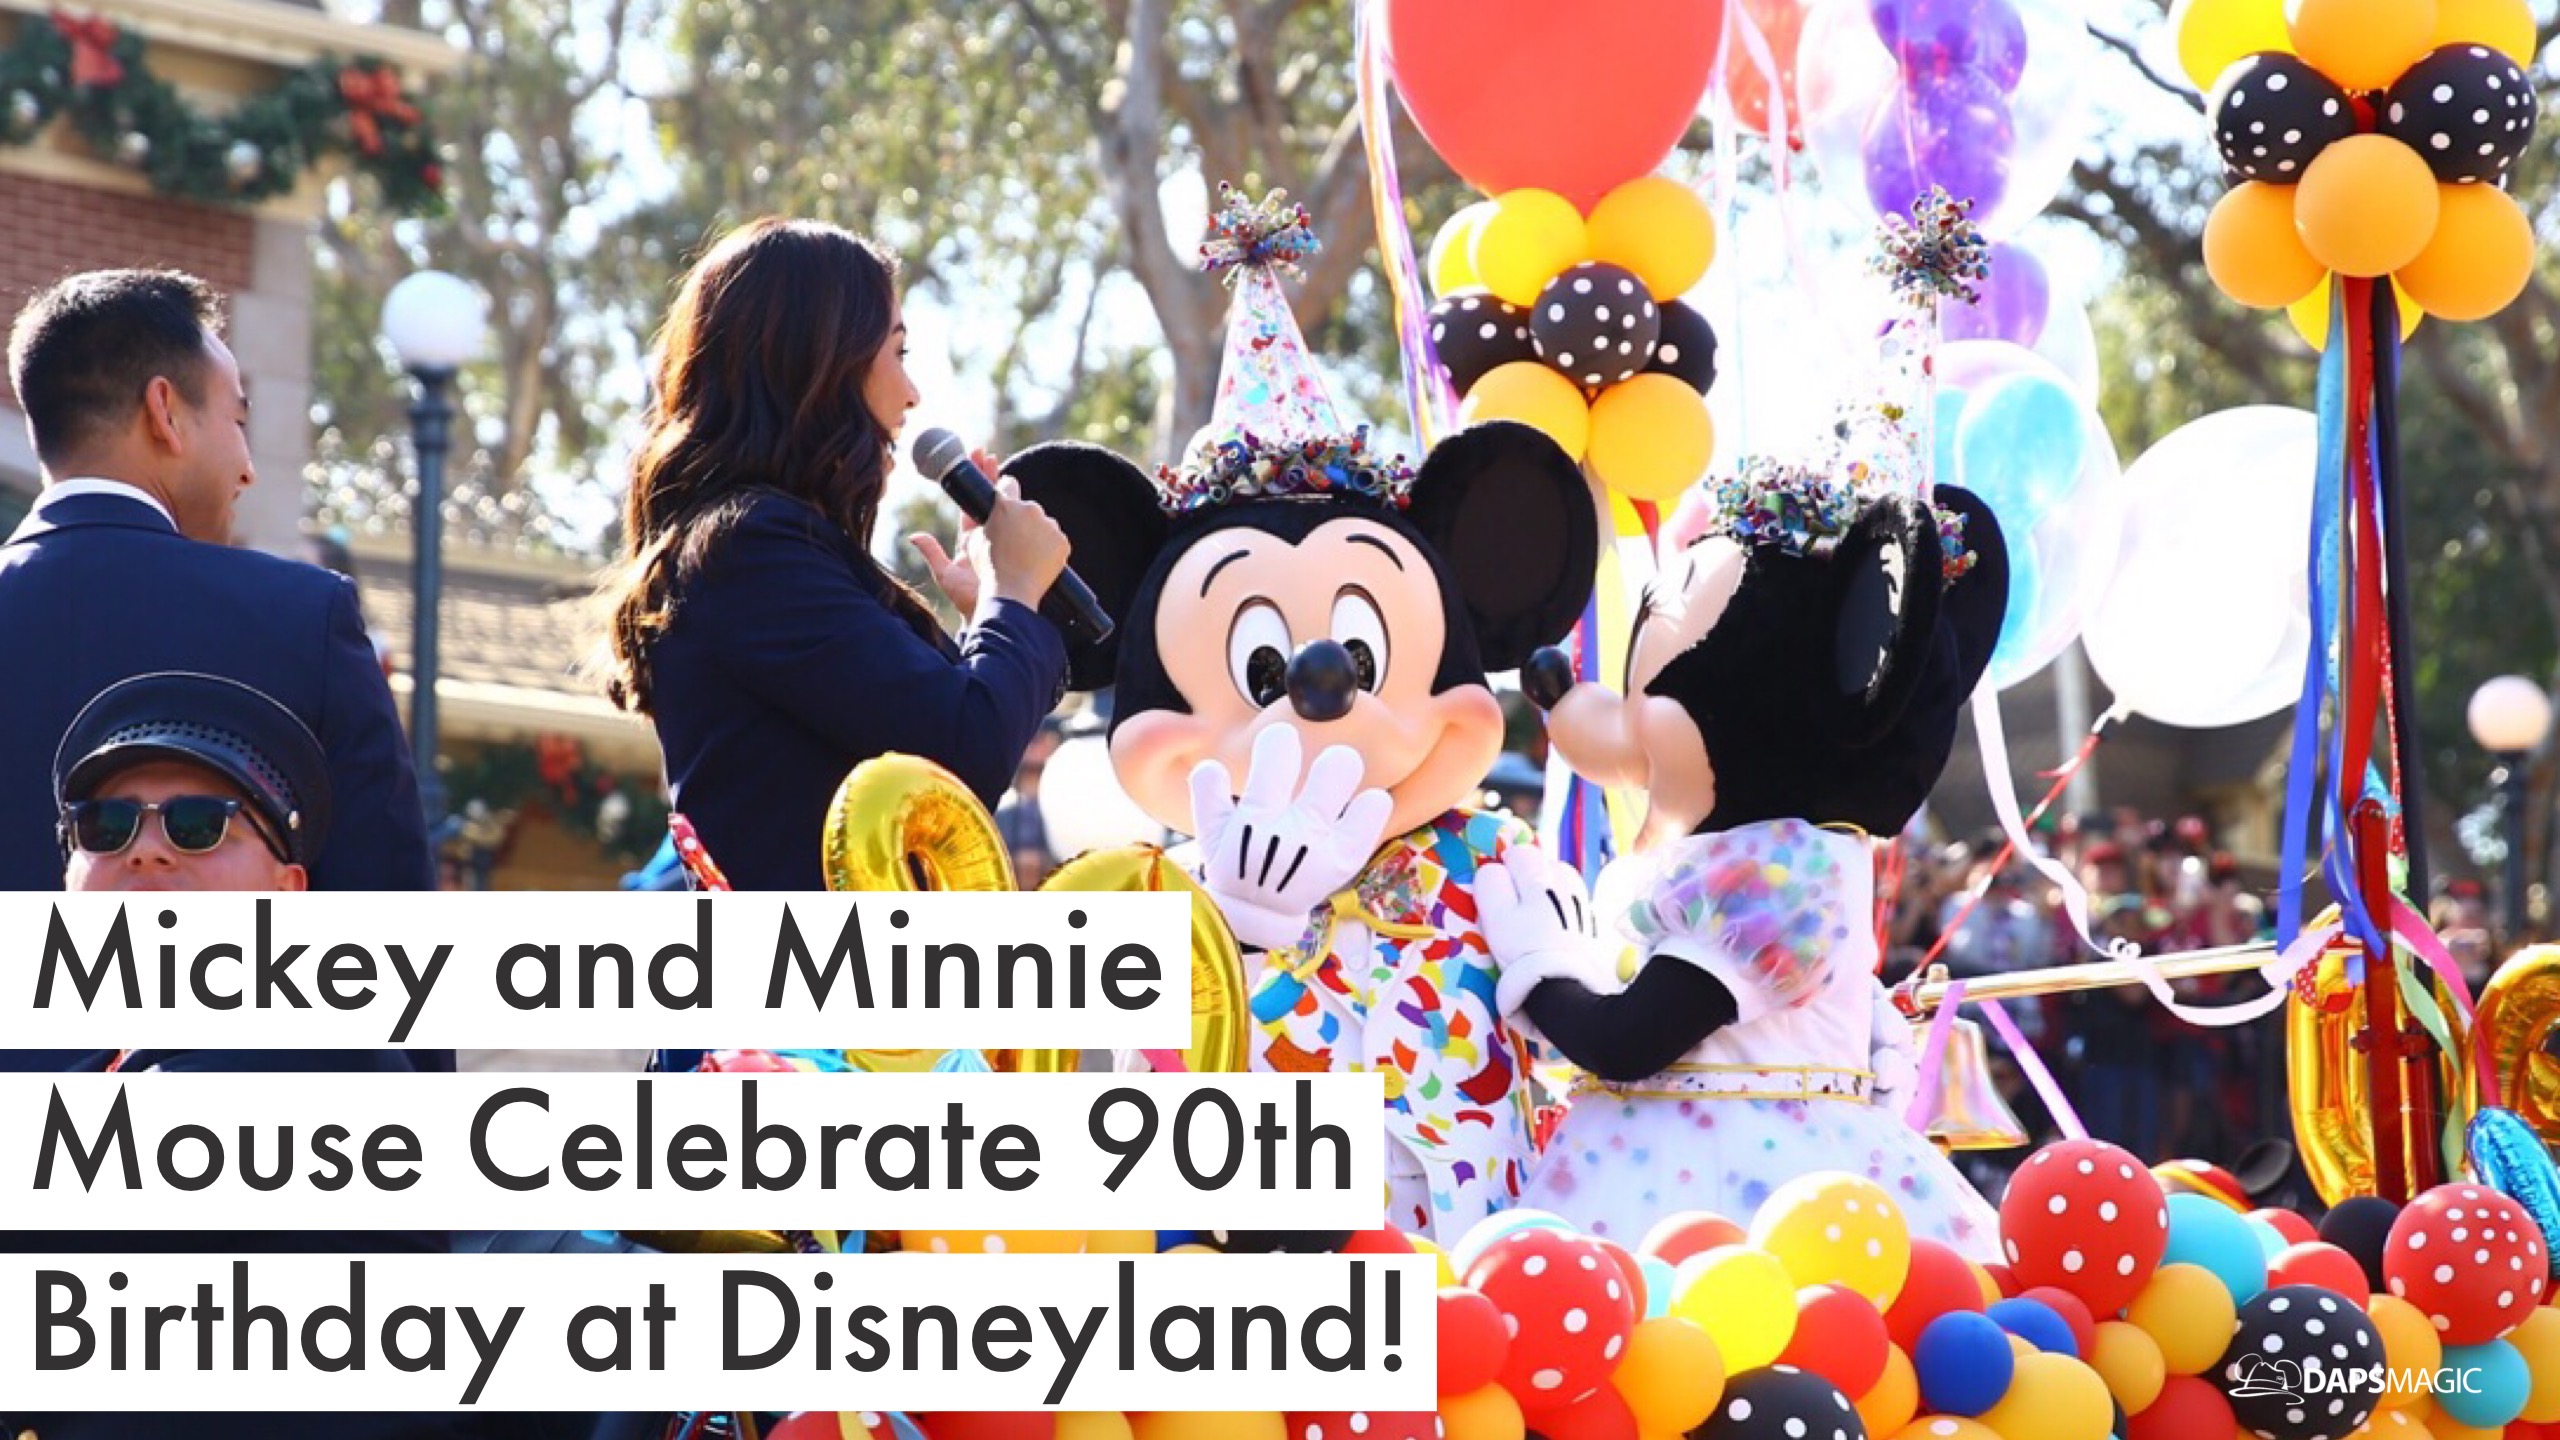 Mickey and Minnie Mouse Party Down Main Street USA with the Gang for the Grand 90th Birthday Celebration!